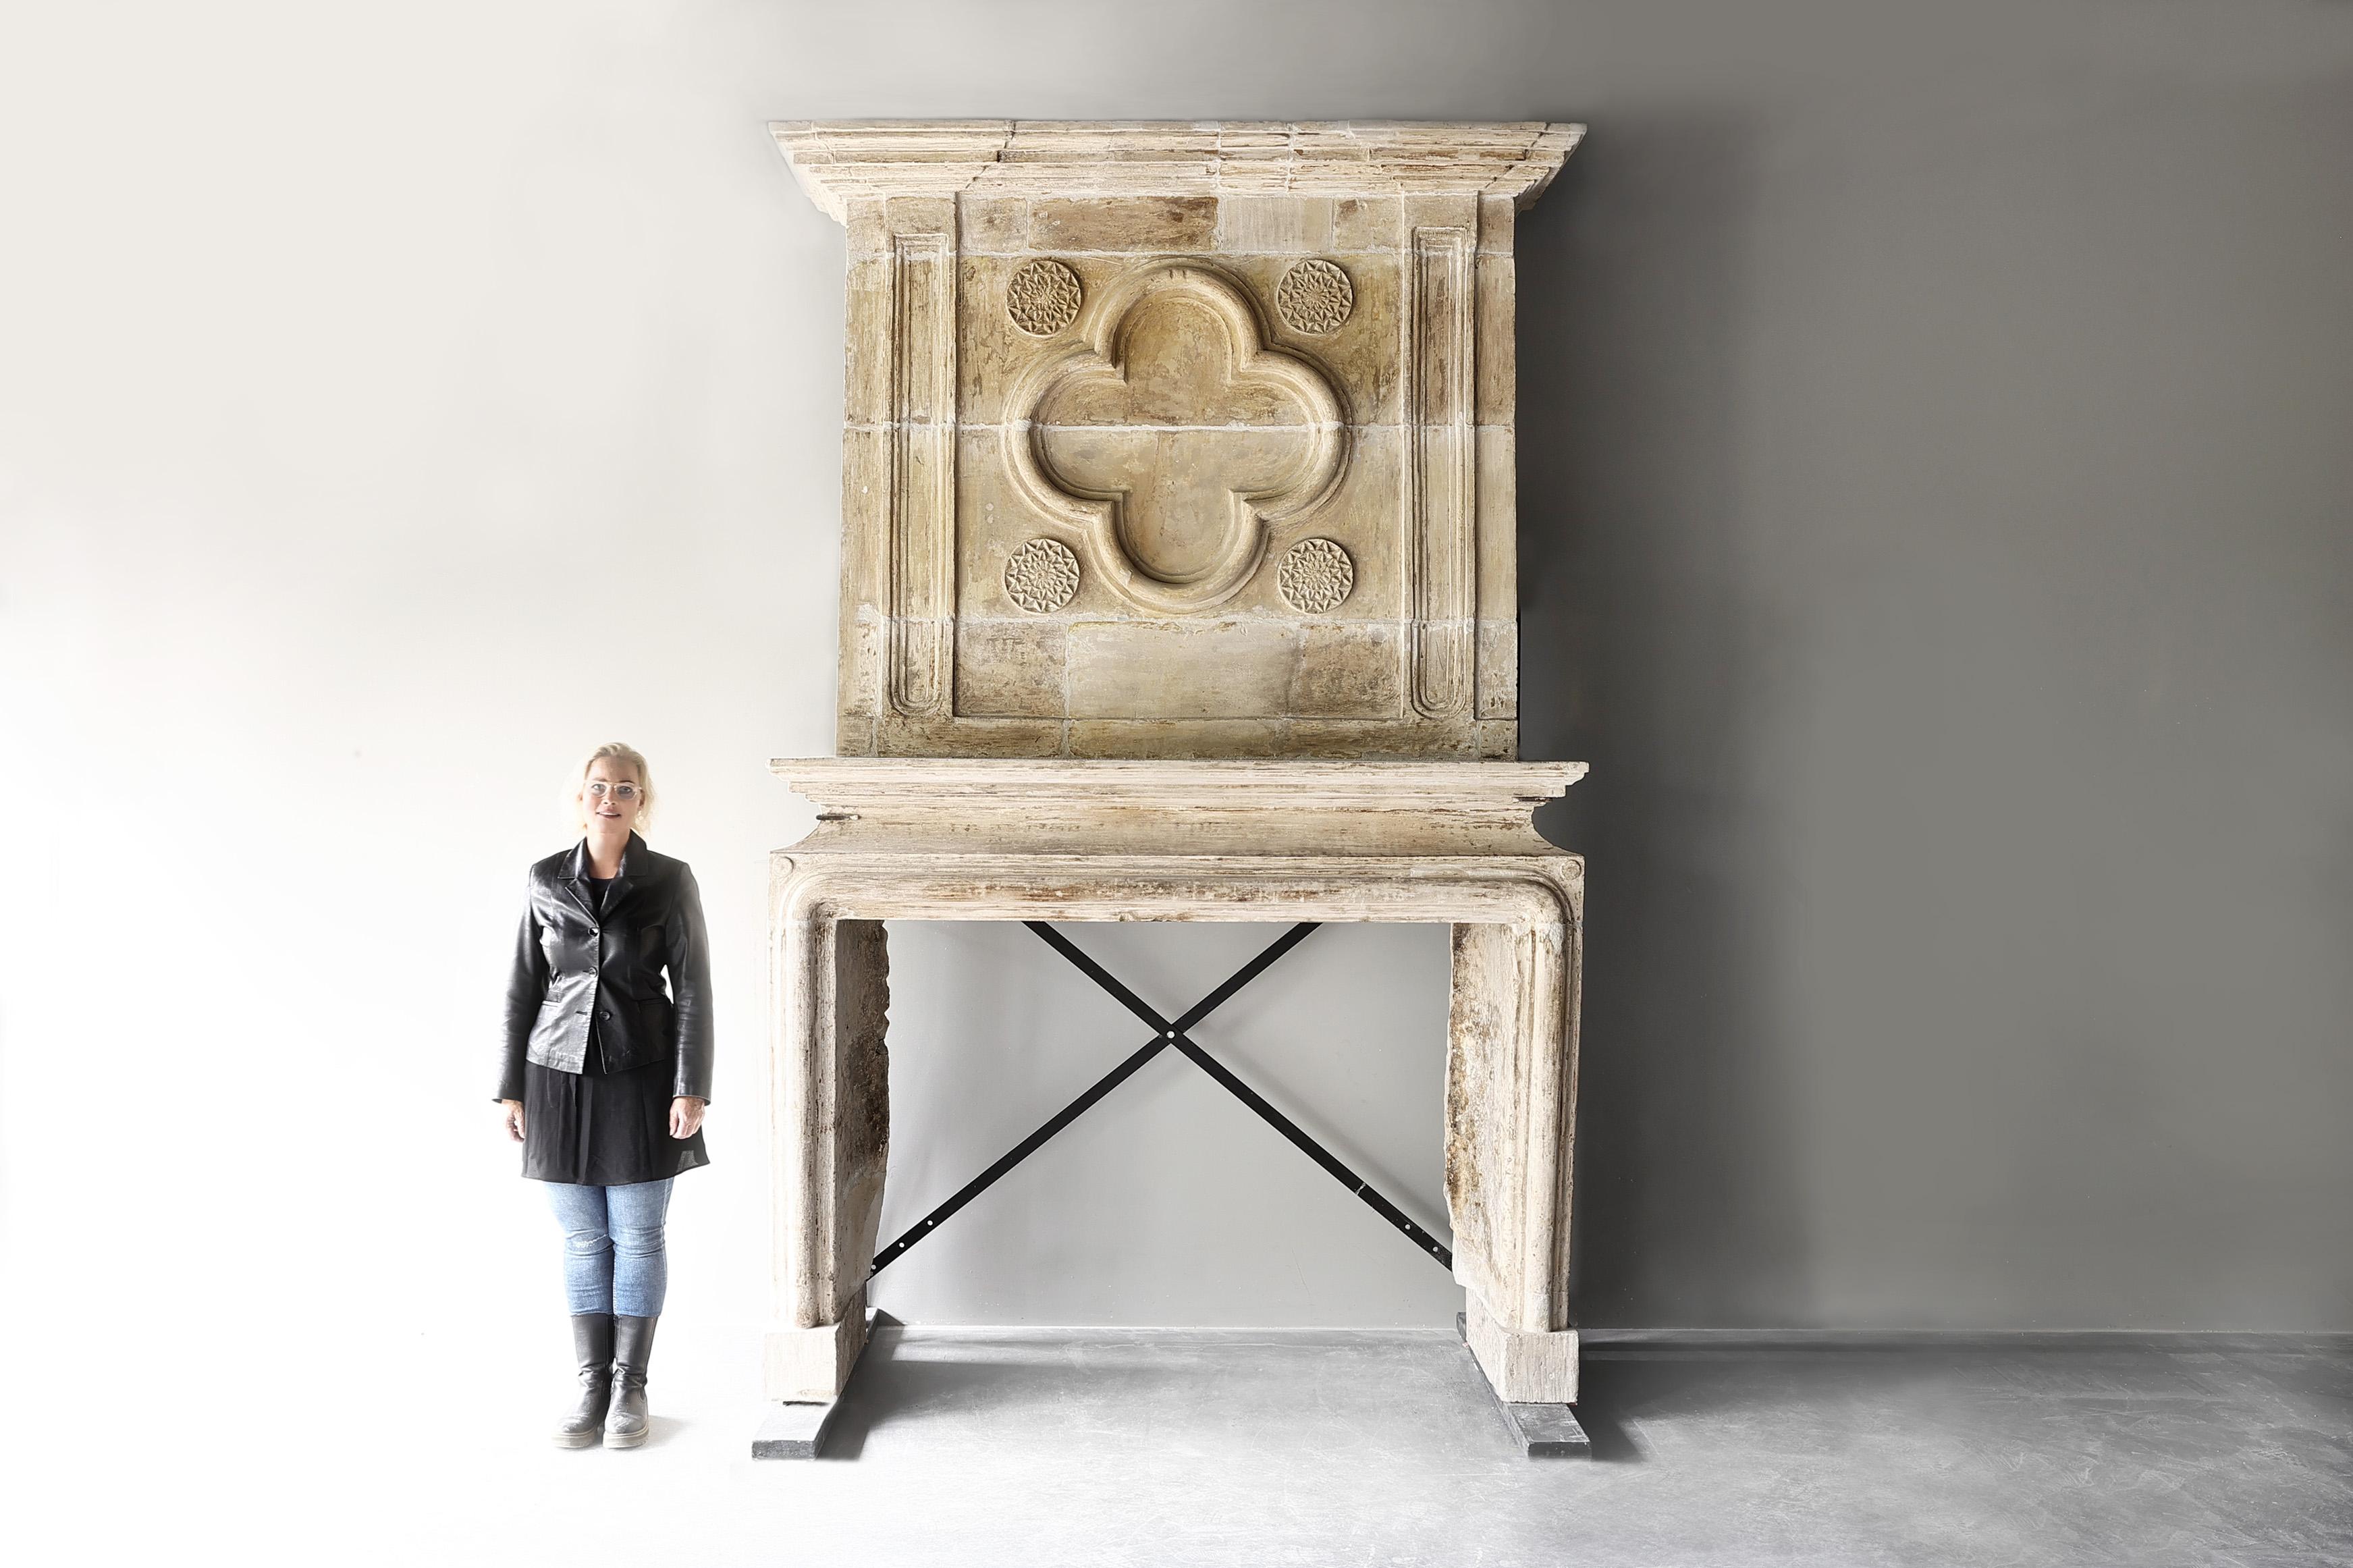 Step into the opulence of the 18th Century with a magnificent Louis XIV fireplace adorned with a striking trumeau on top, crafted from exquisite French limestone. This antique mantelpiece exudes a timeless grandeur that captures the essence of a